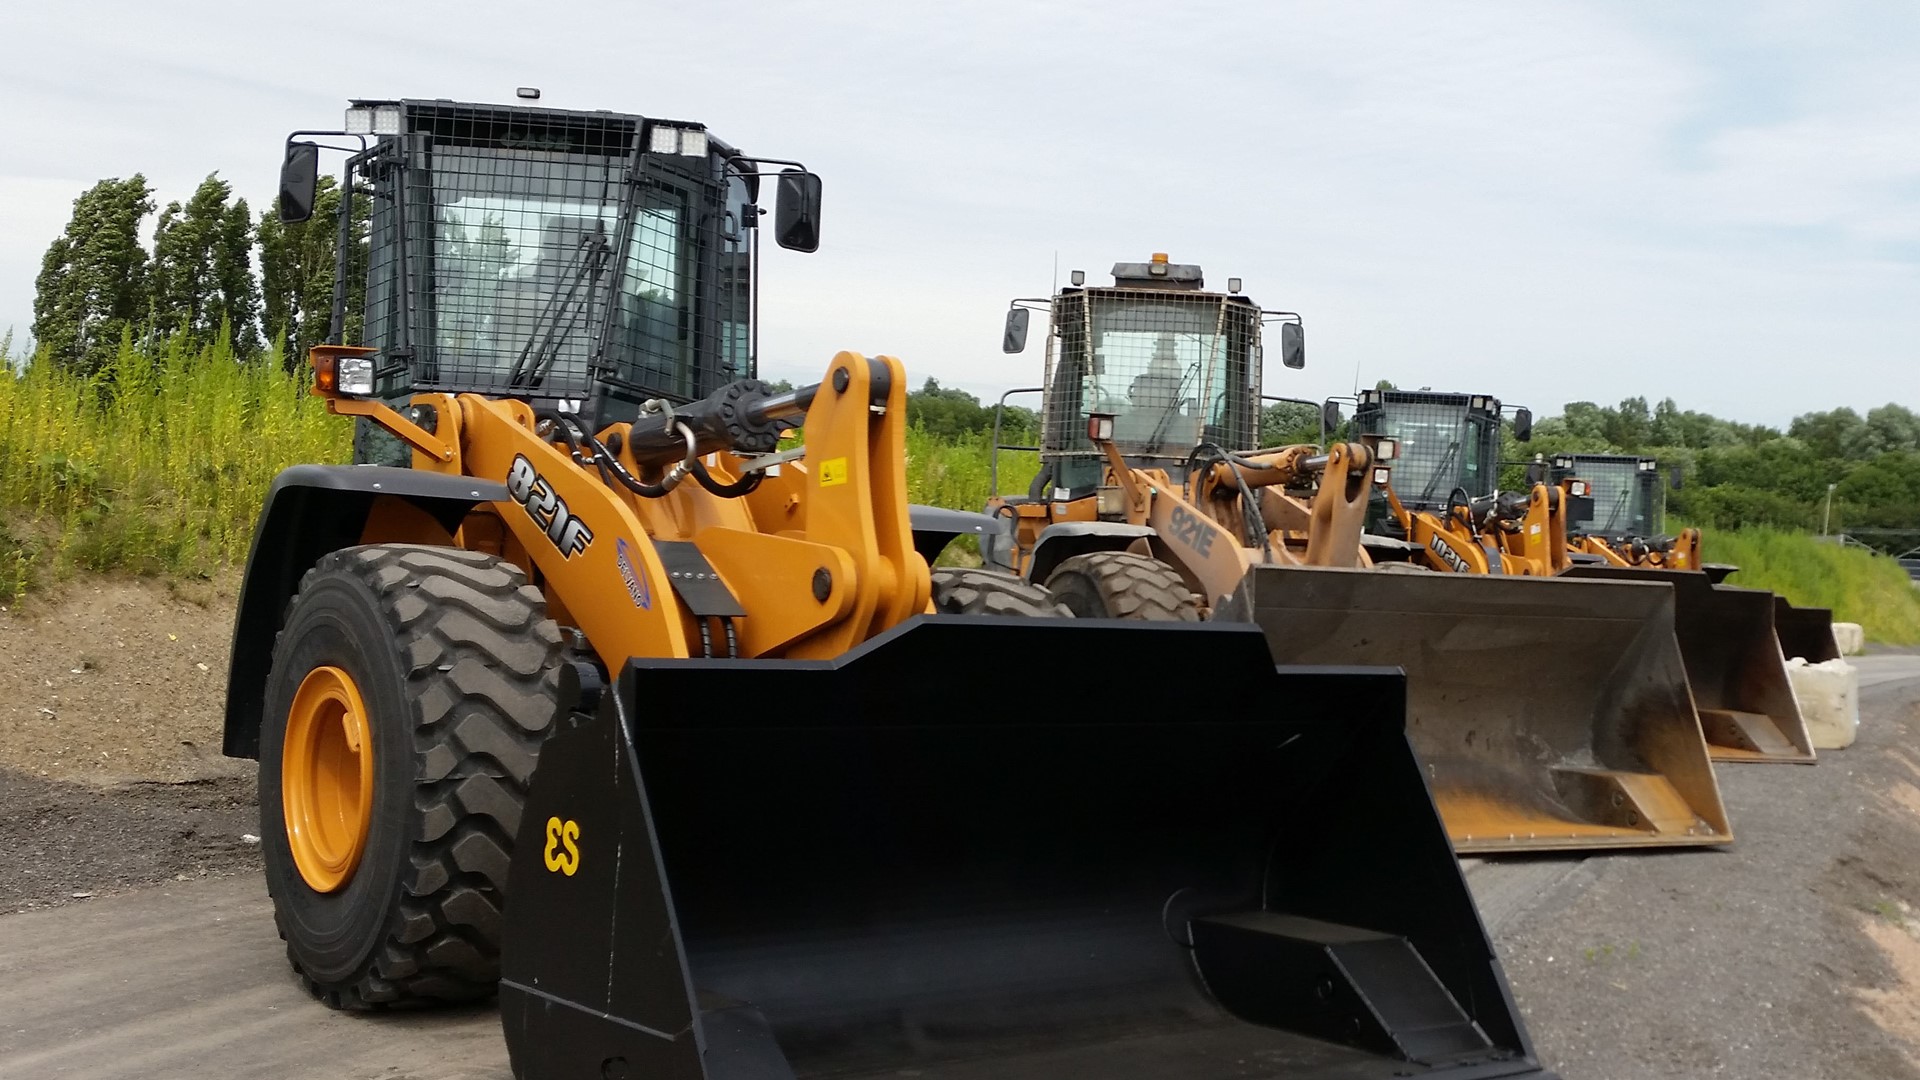 Imog's most recent additions to its fleet were five F Series wheel loaders purchased over the last two years